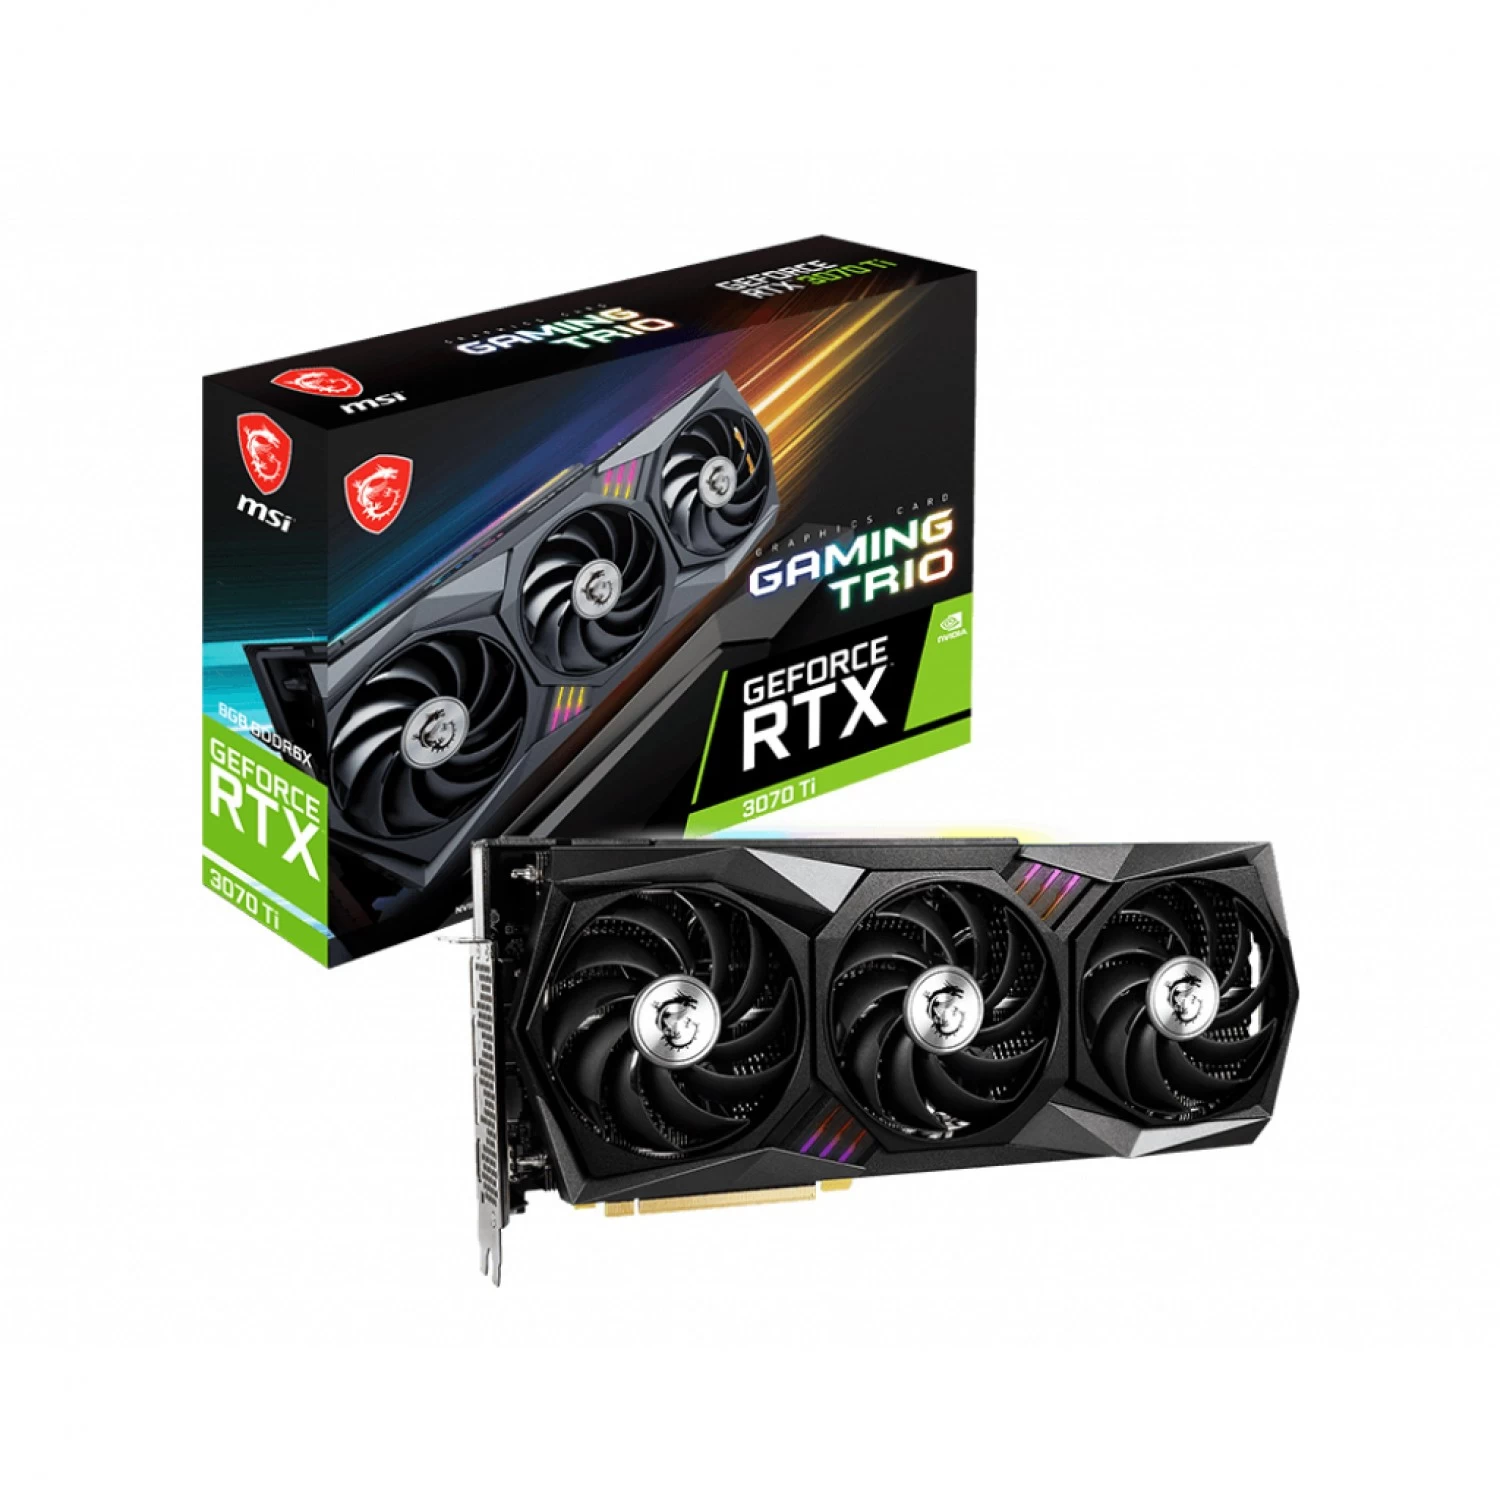 GeForce RTX 3070 Ti GAMING TRIO 8G Package